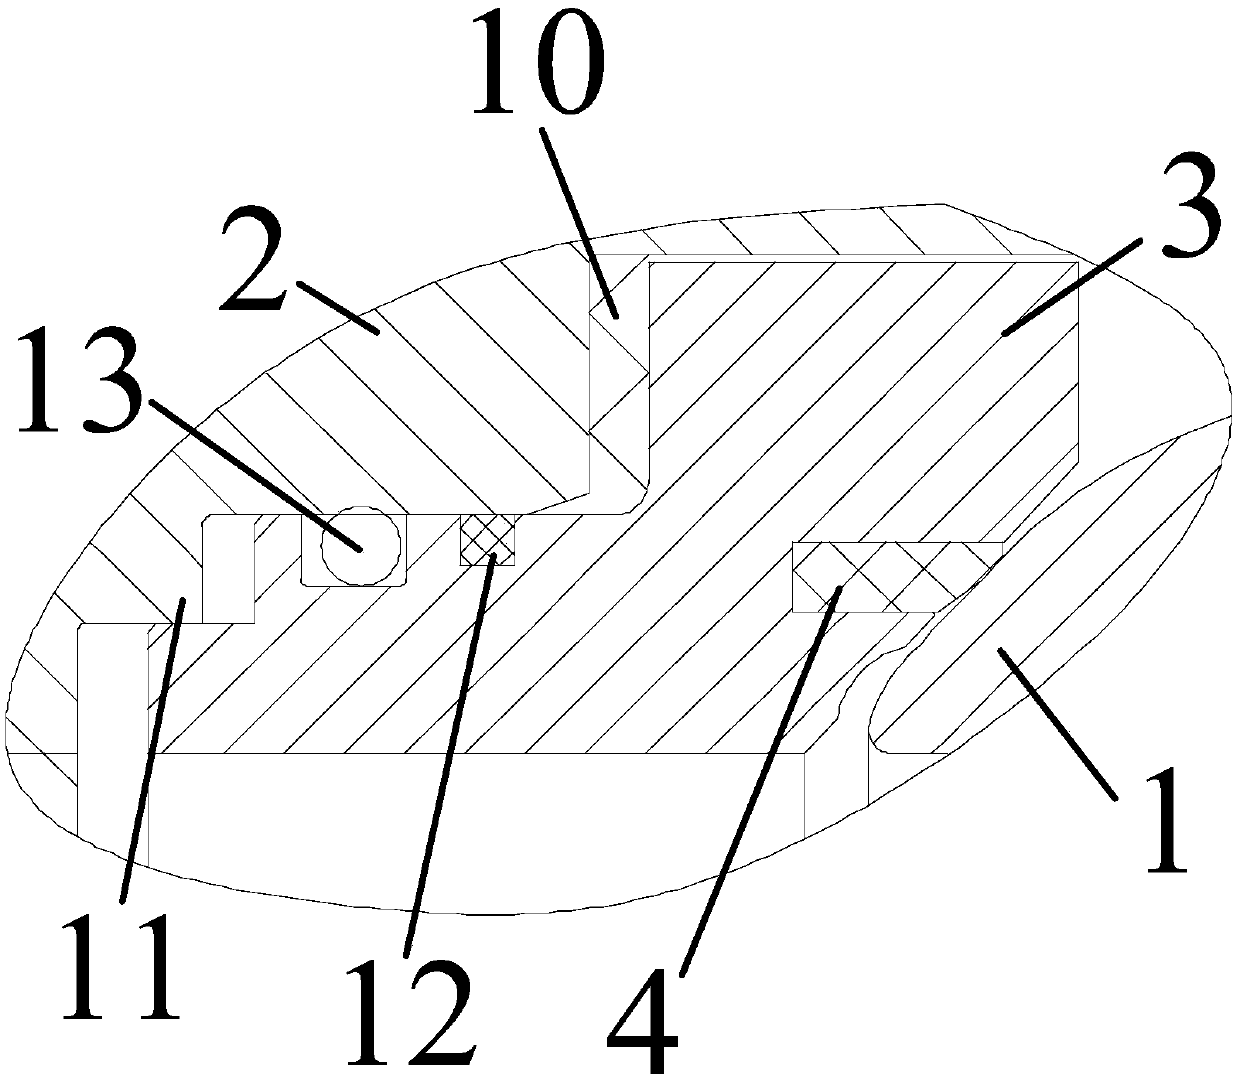 A sealing structure for sealing valve